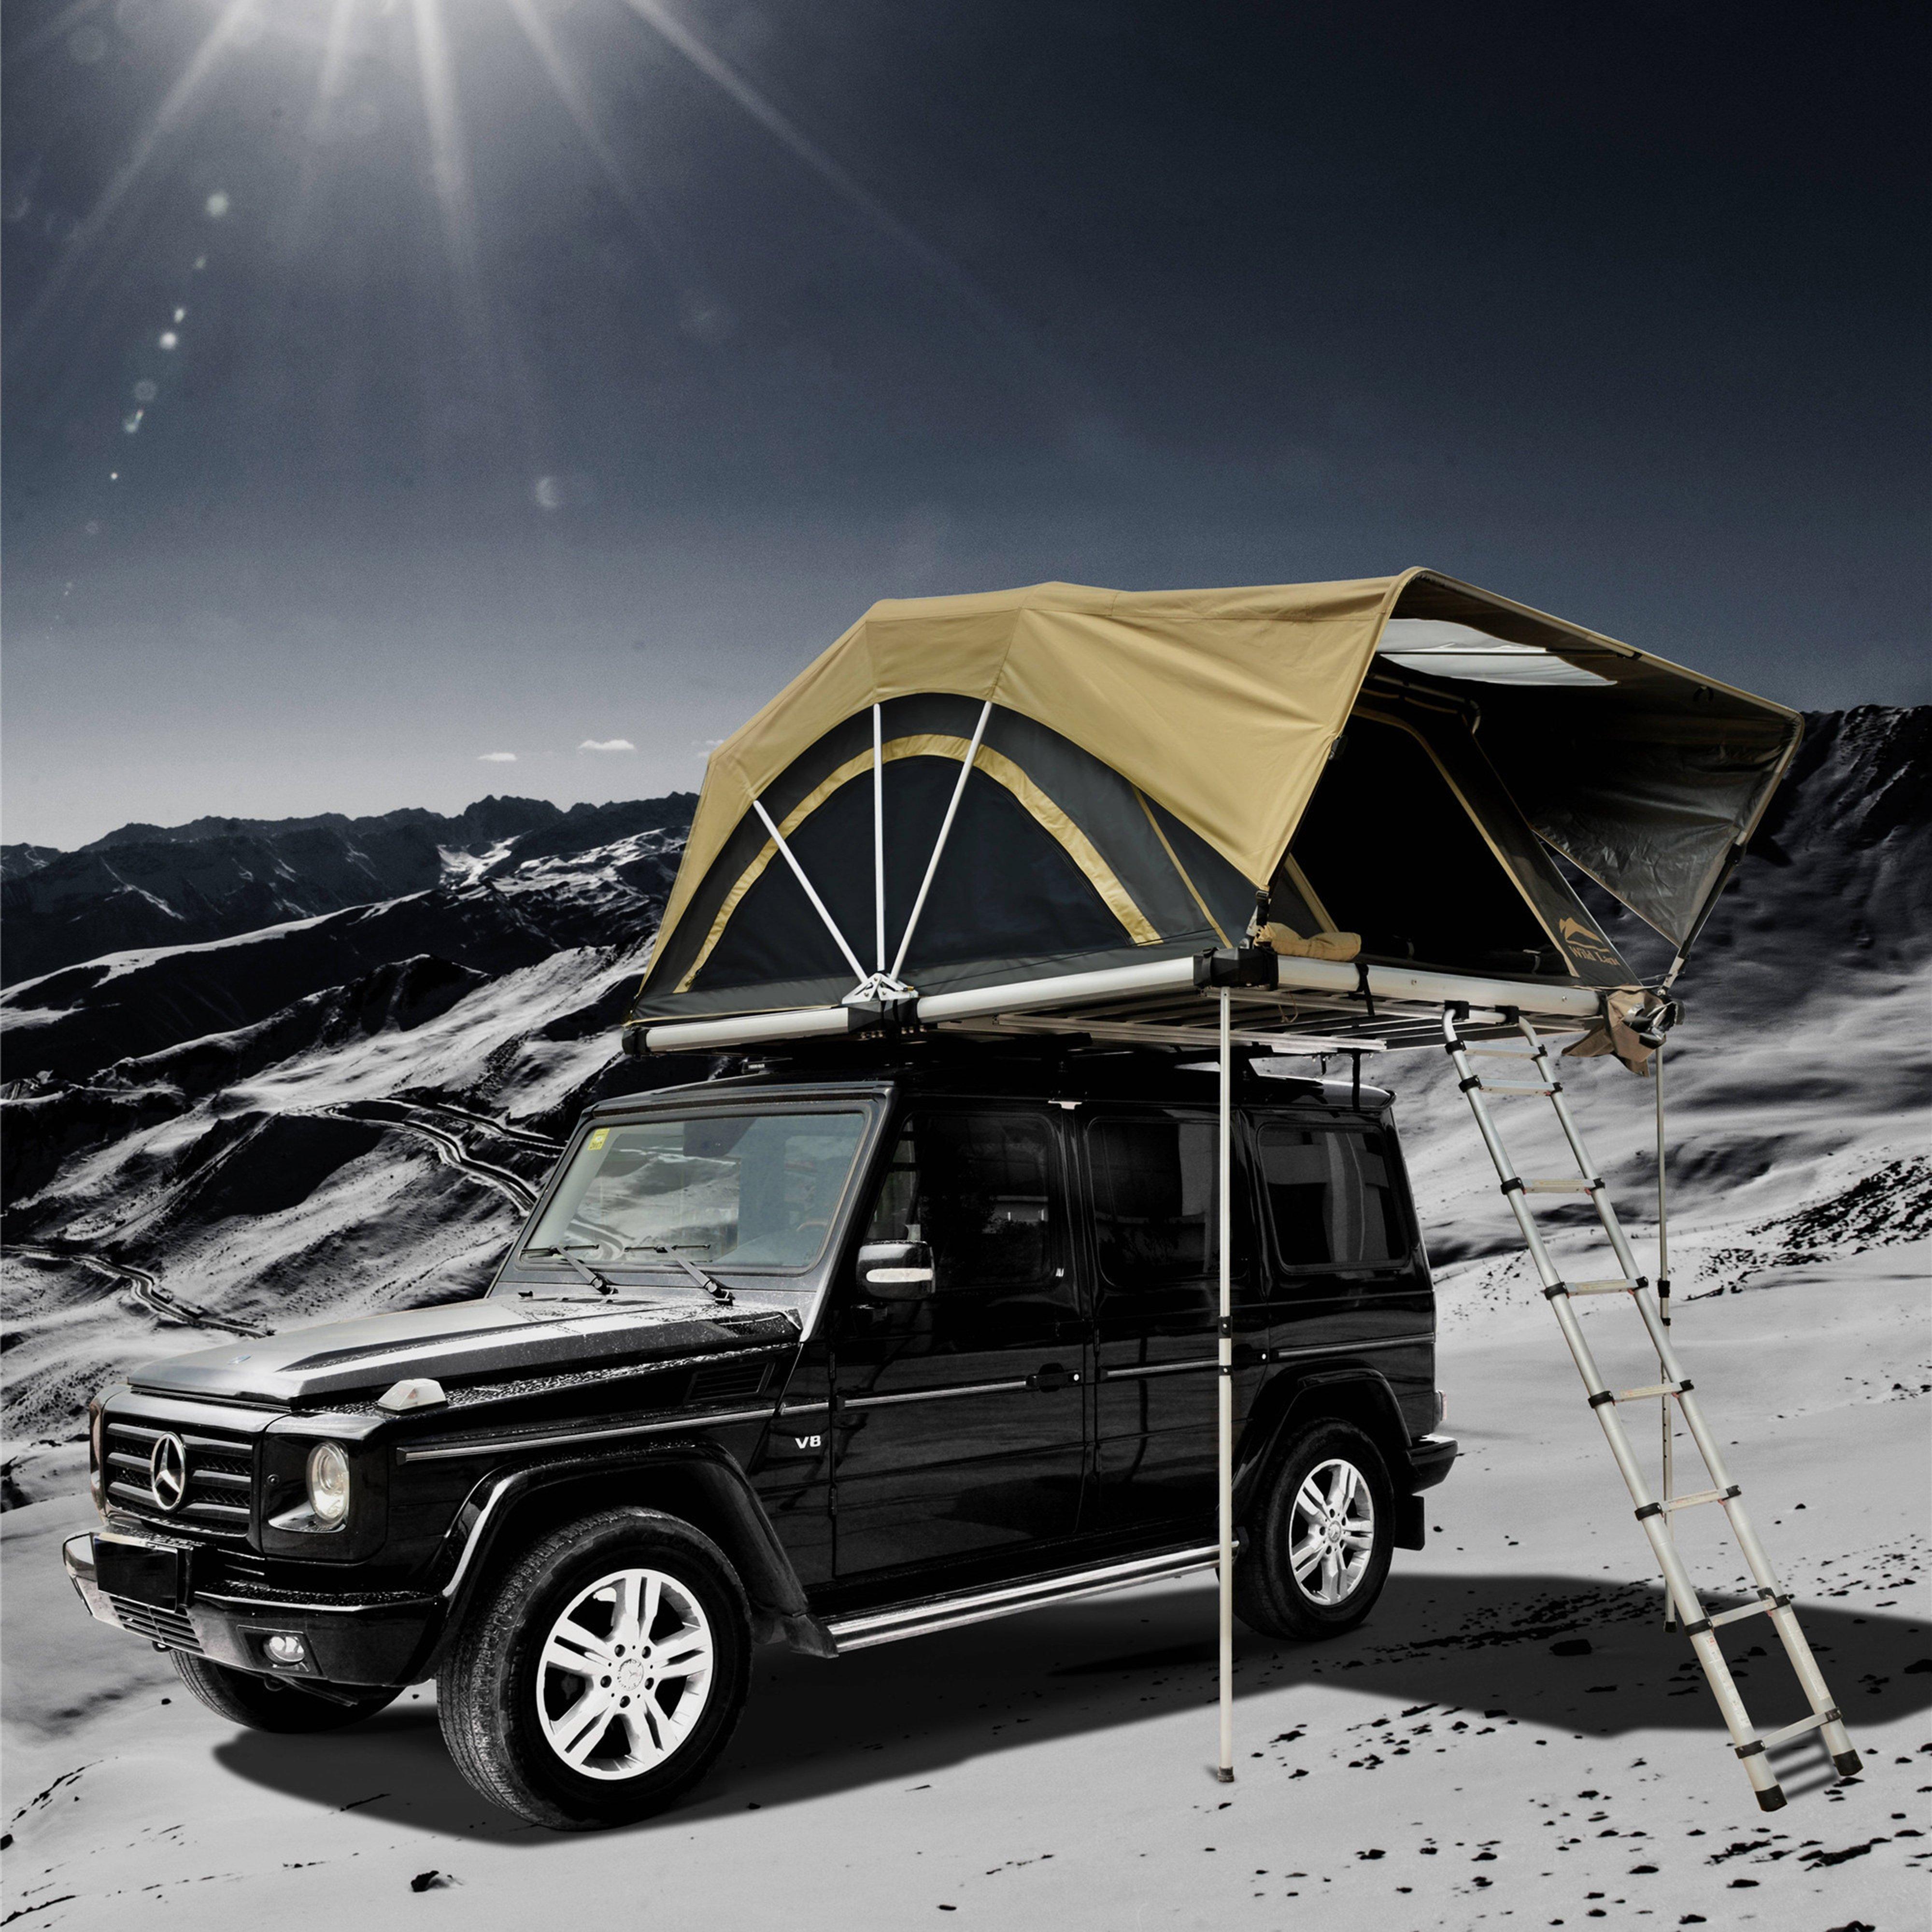 Roof Box Body Kit Roof Rail Car Aluminum Roof Cargo Camping Luggage Rack Out Door Tent Roof Rack Accessory High Capacity - 3